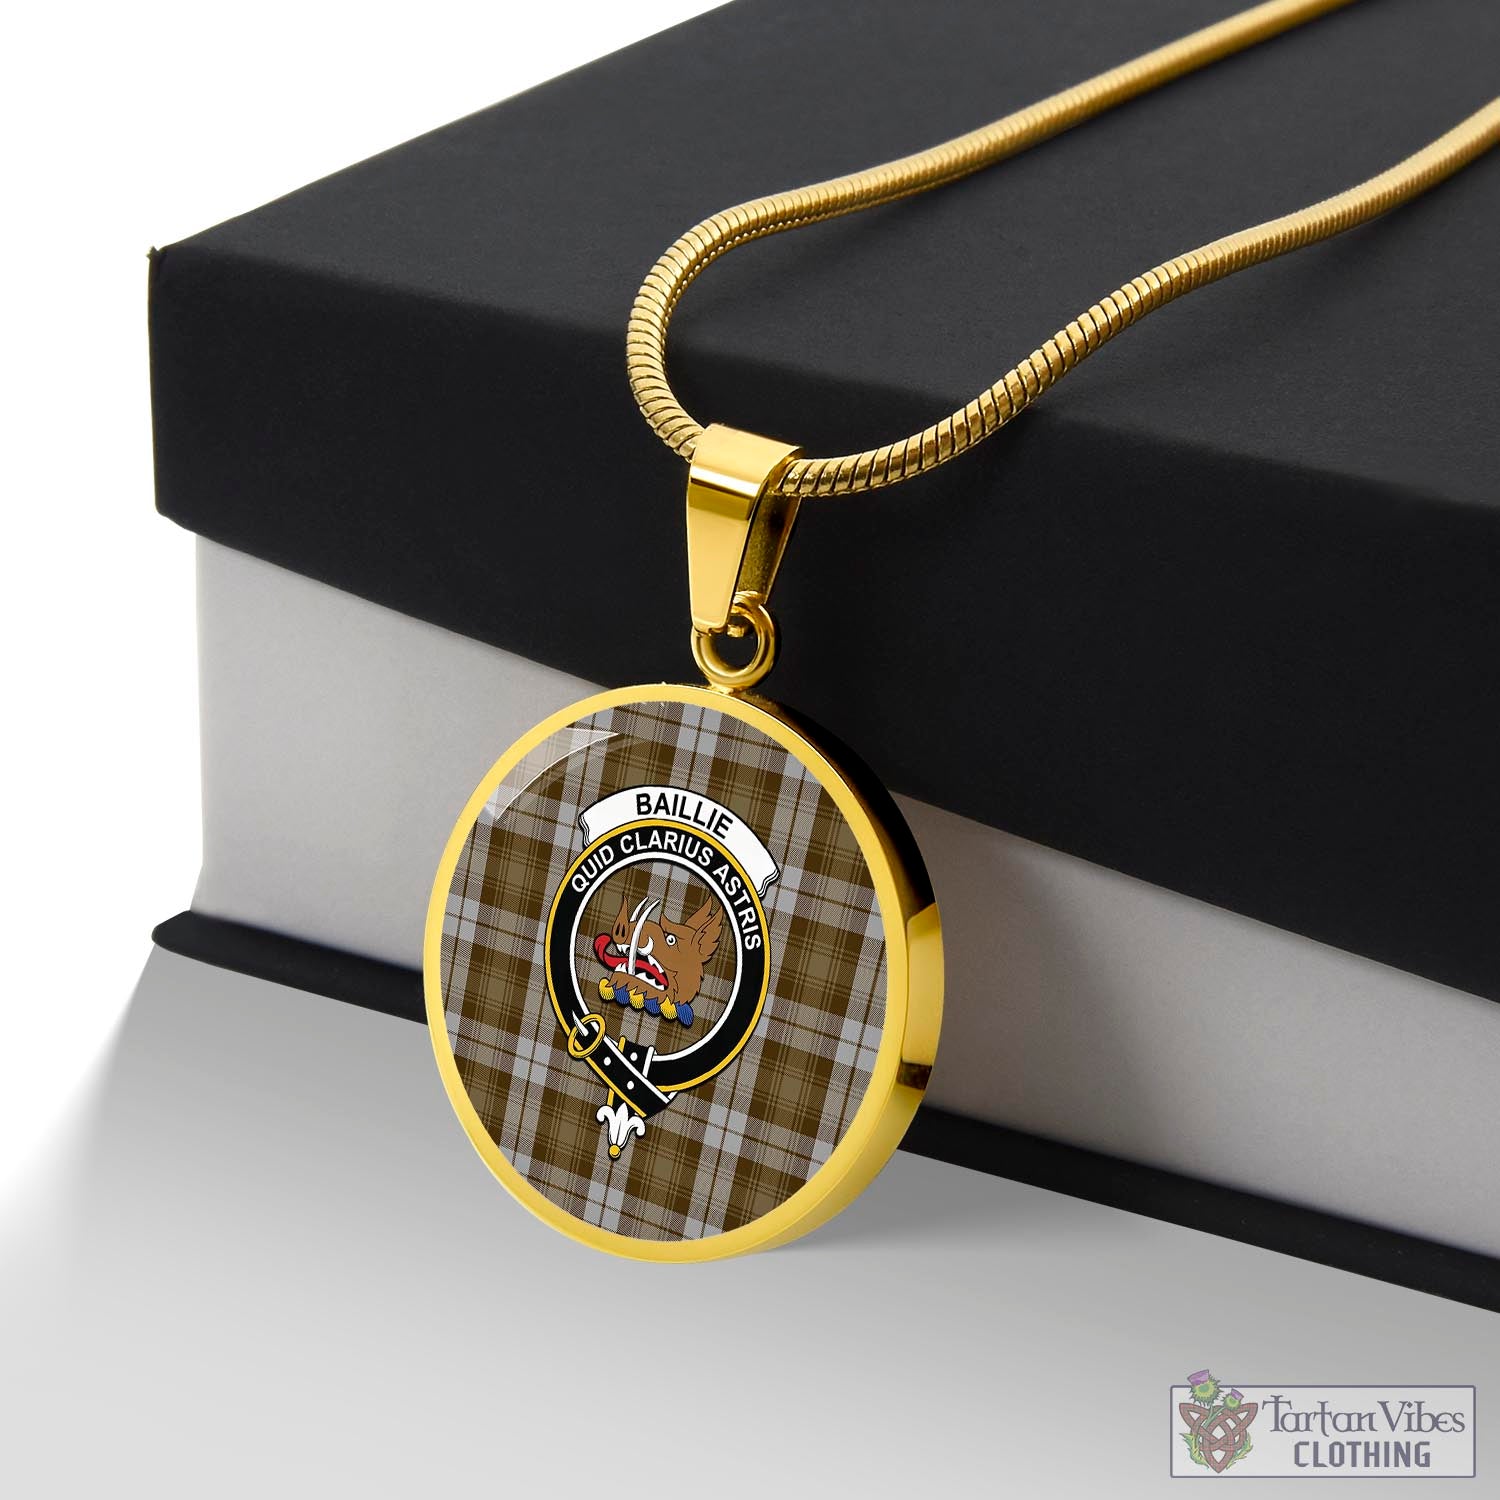 Tartan Vibes Clothing Baillie Dress Tartan Circle Necklace with Family Crest